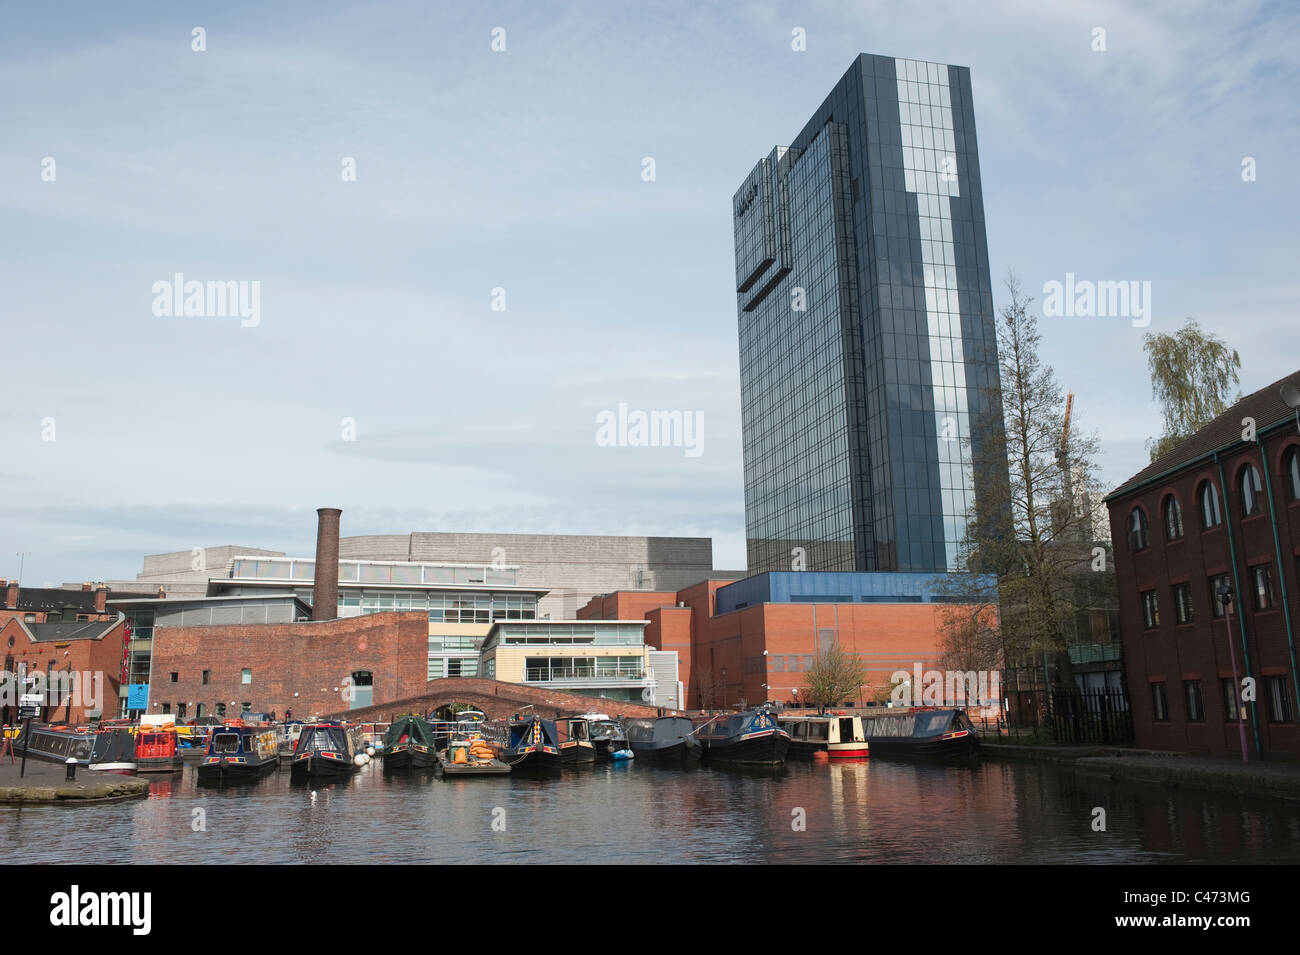 Brindley Place canal centre in Birmingham Stock Photo